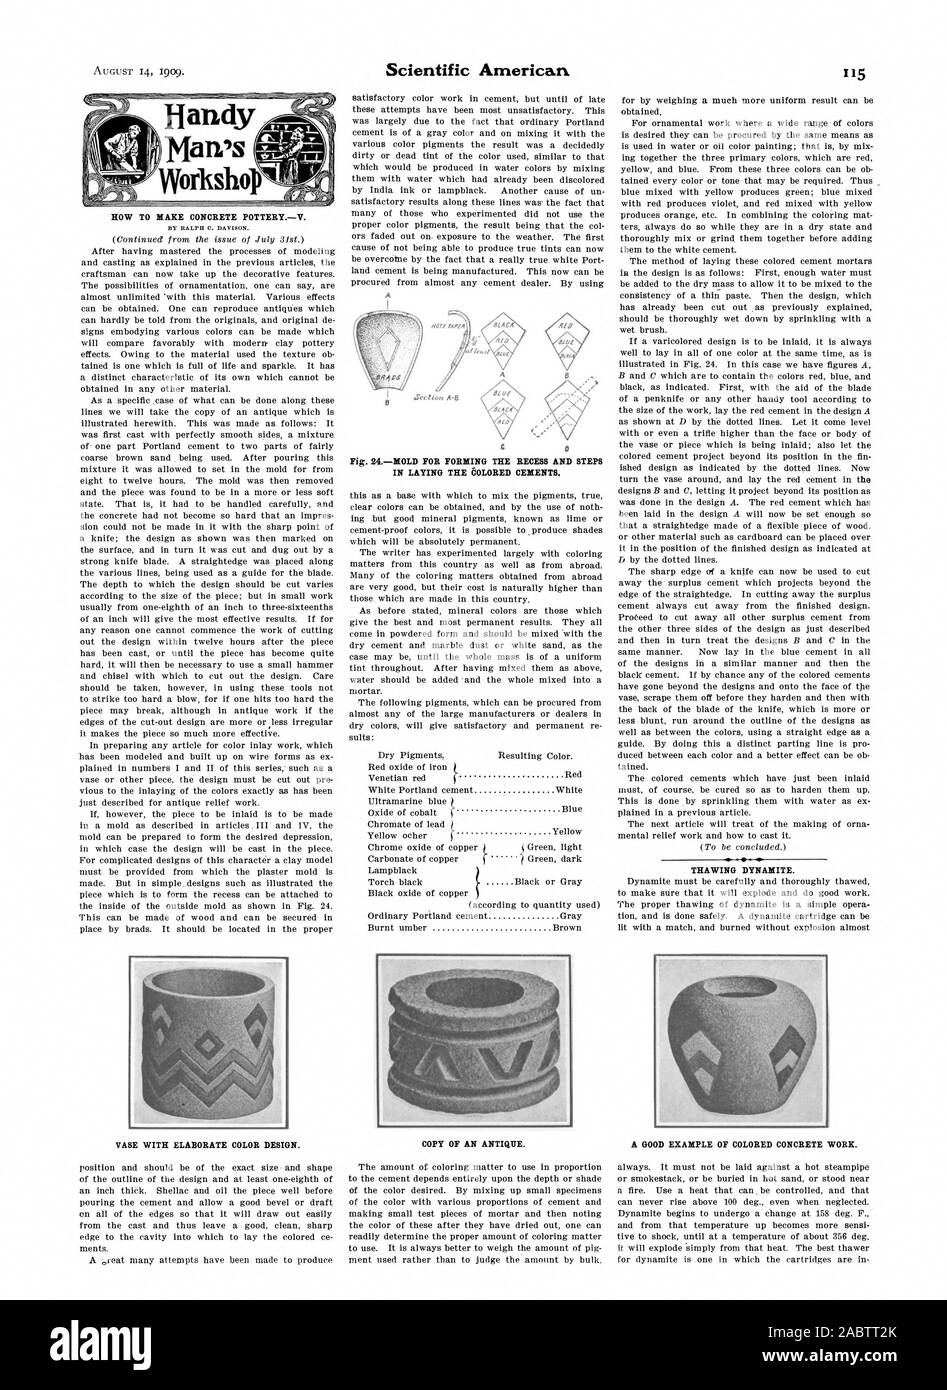 HOW TO MAKE CONCRETE POTTERYV. Fig. 24MOLD FOR FORMING THE RECESS AND STEPS IN LAYING THE 60LORED CEMENTS. THAWING DYNAMITE. VASE WITH ELABORATE COLOR DESIGN. COPY OF AN ANTIQUE. A GOOD EXAMPLE OF COLORED CONCRETE WORK., scientific american, -1909-08-14 Stock Photo